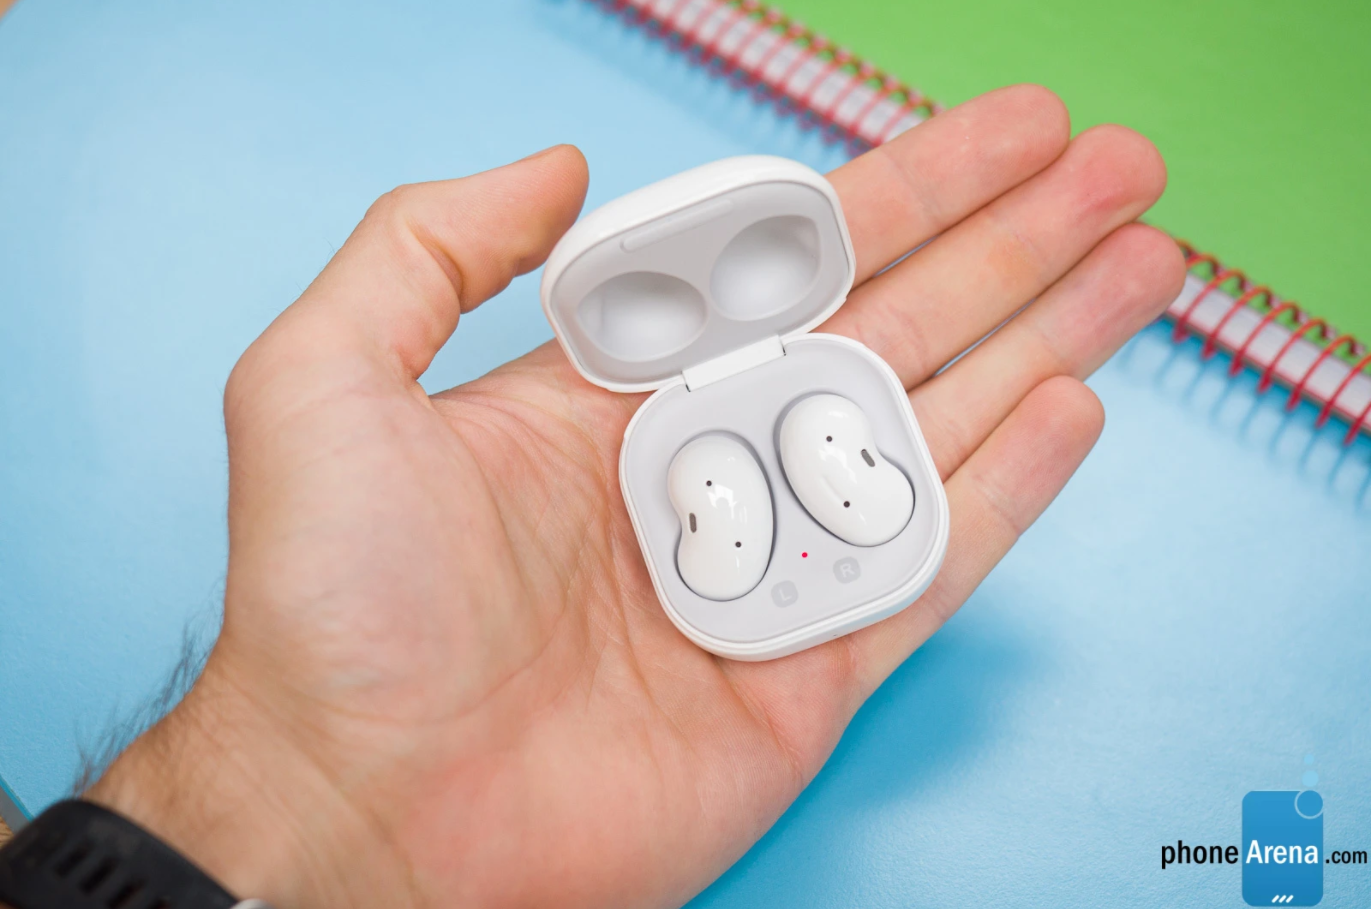 The bean-shaped Galaxy Buds Live are another good pair of Samsung true wireless earbuds - Samsung Galaxy Buds 2 vs Galaxy Buds 1: Differences we expect so far